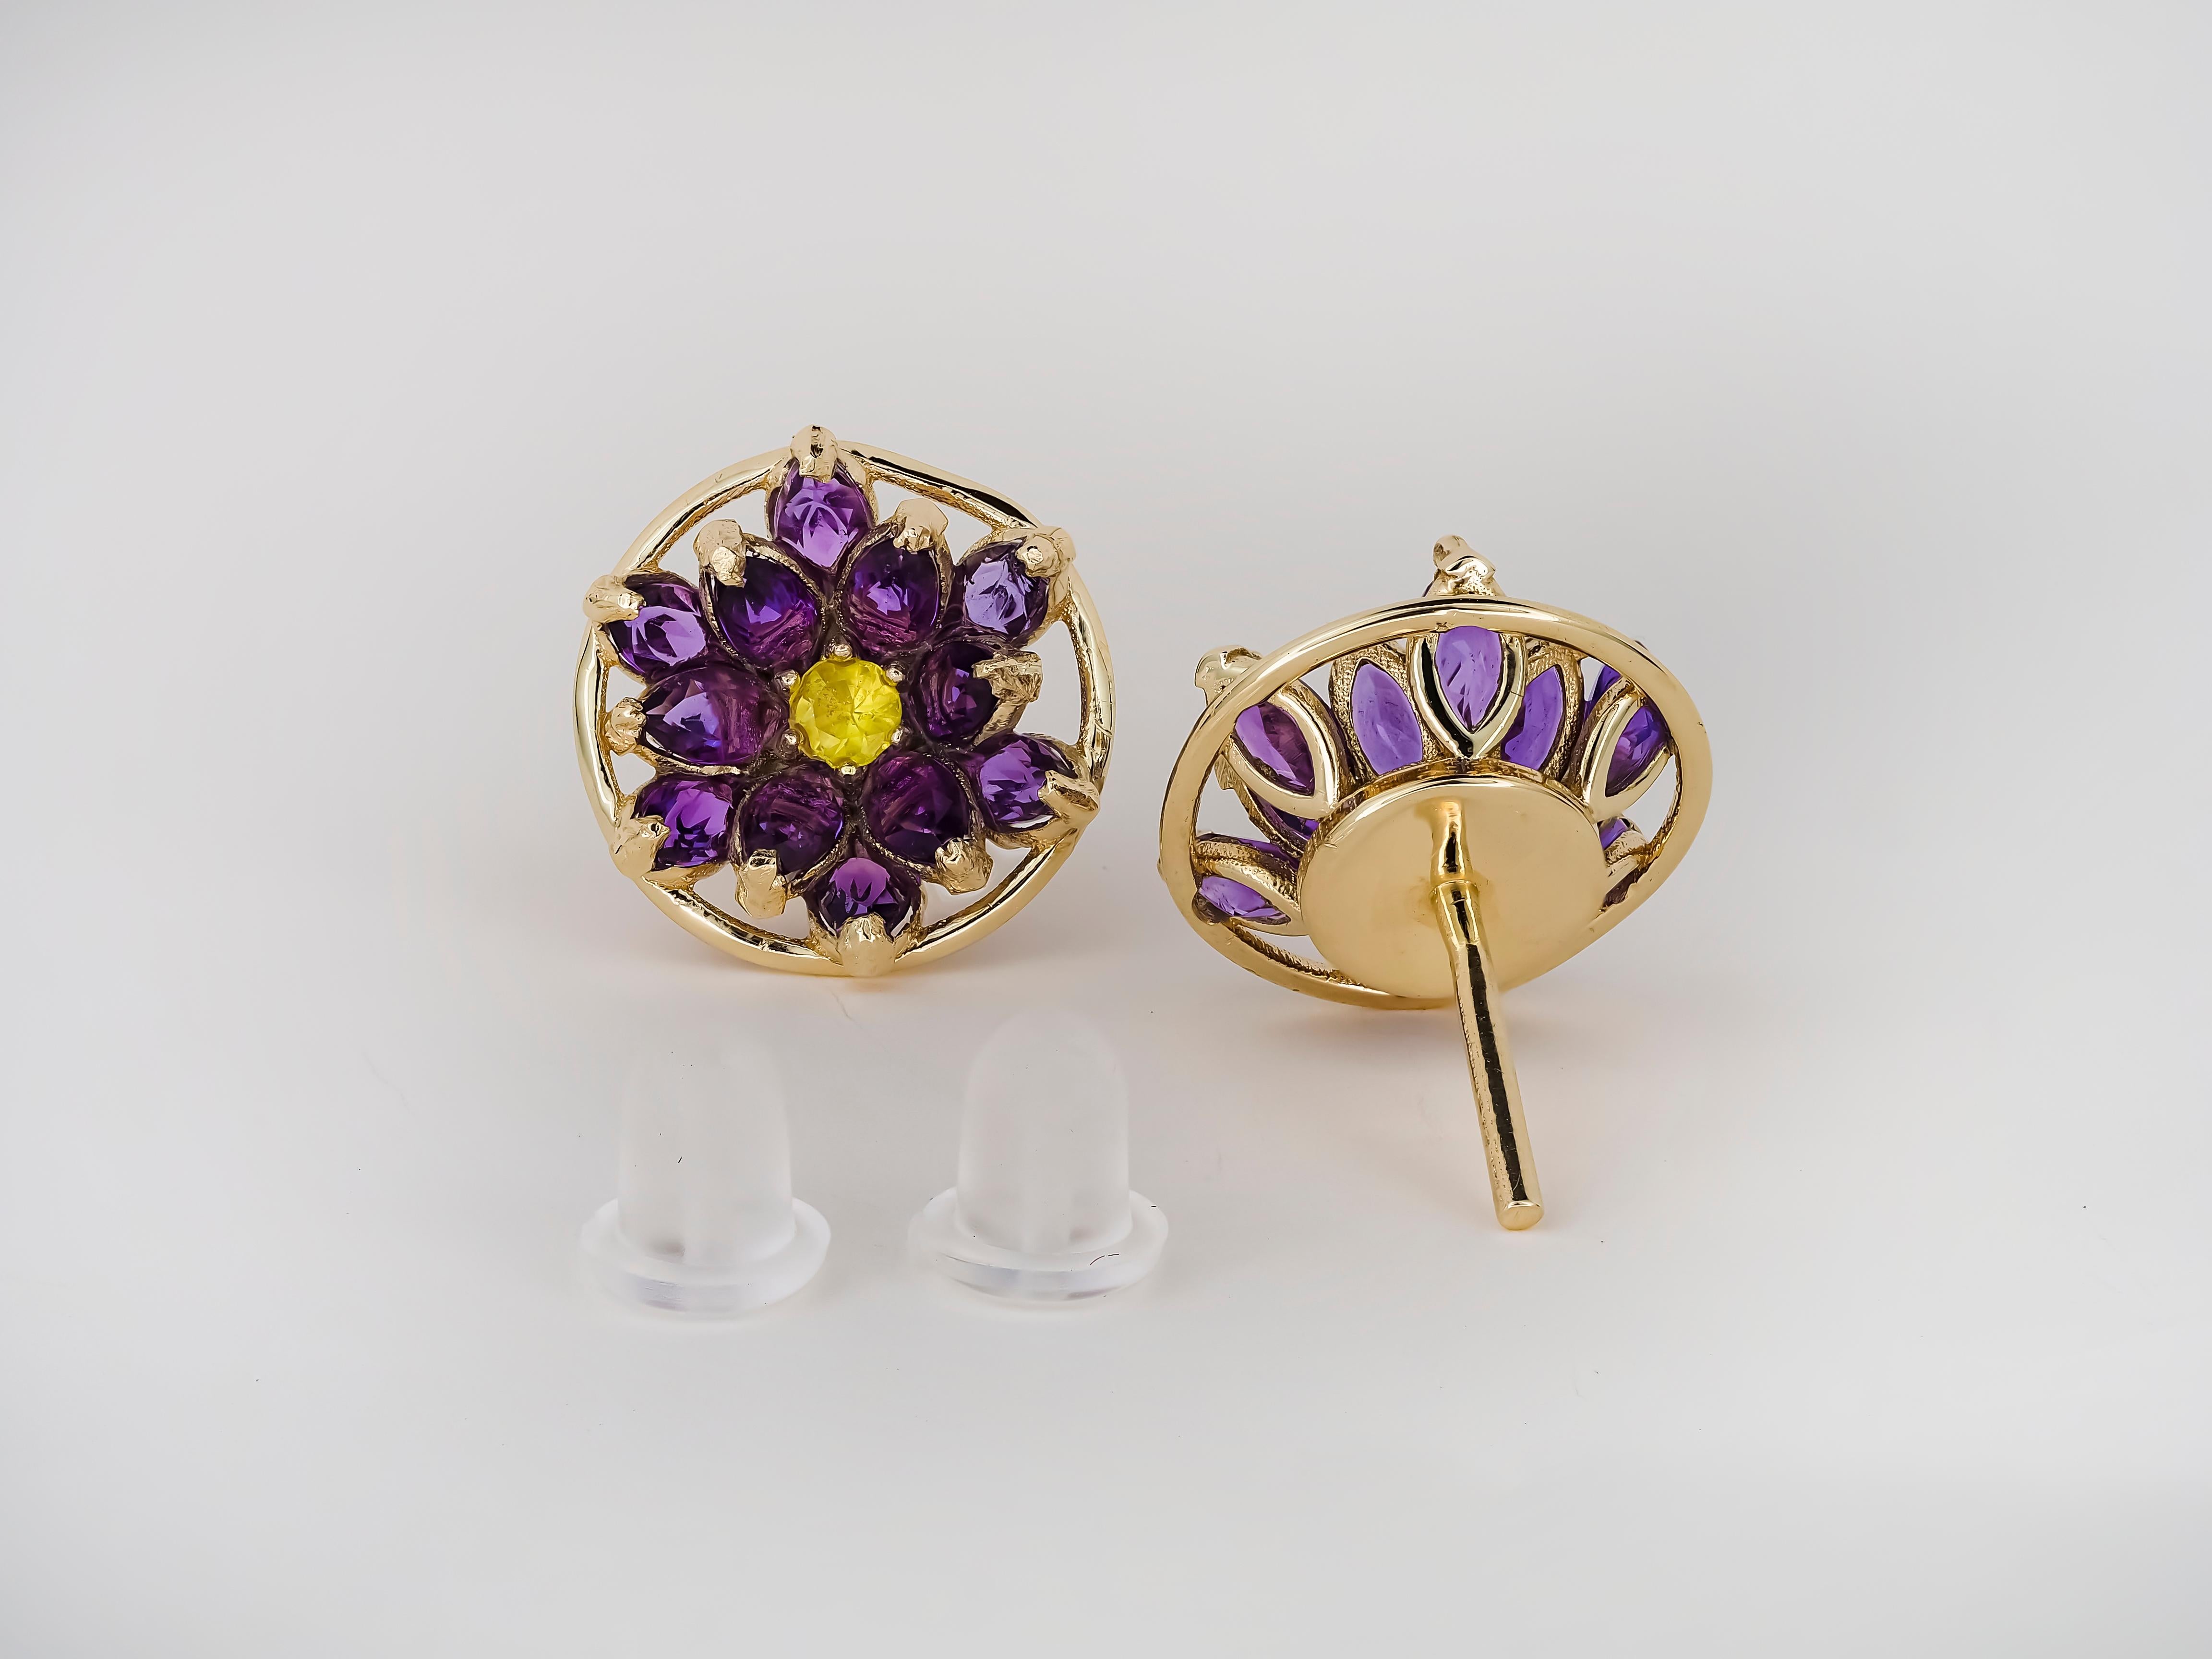 Lotus Flower Earrings Studs in 14k Gold, Amethyst and Sapphires Earrings In New Condition For Sale In Istanbul, TR